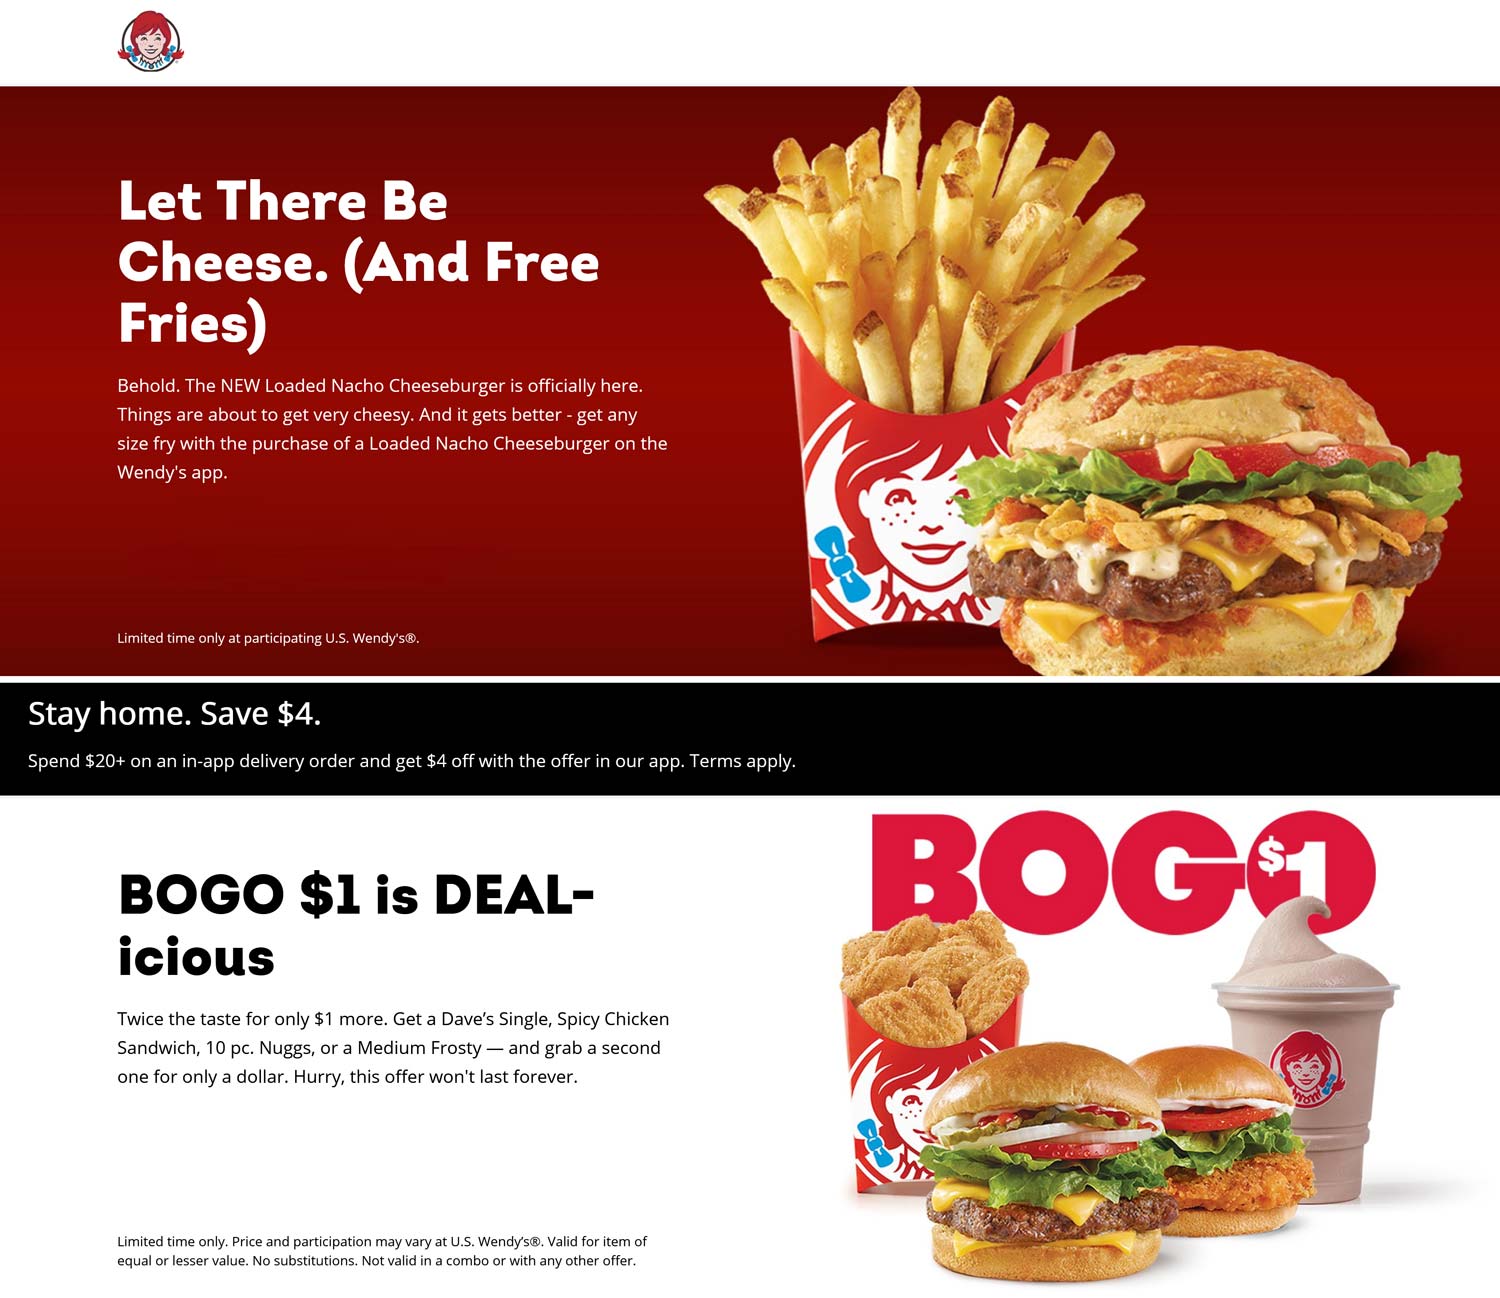 Wendys restaurants Coupon  Free large fries with your nacho cheeseburger at Wendys, also $4 off $20 delivery via mobile #wendys 